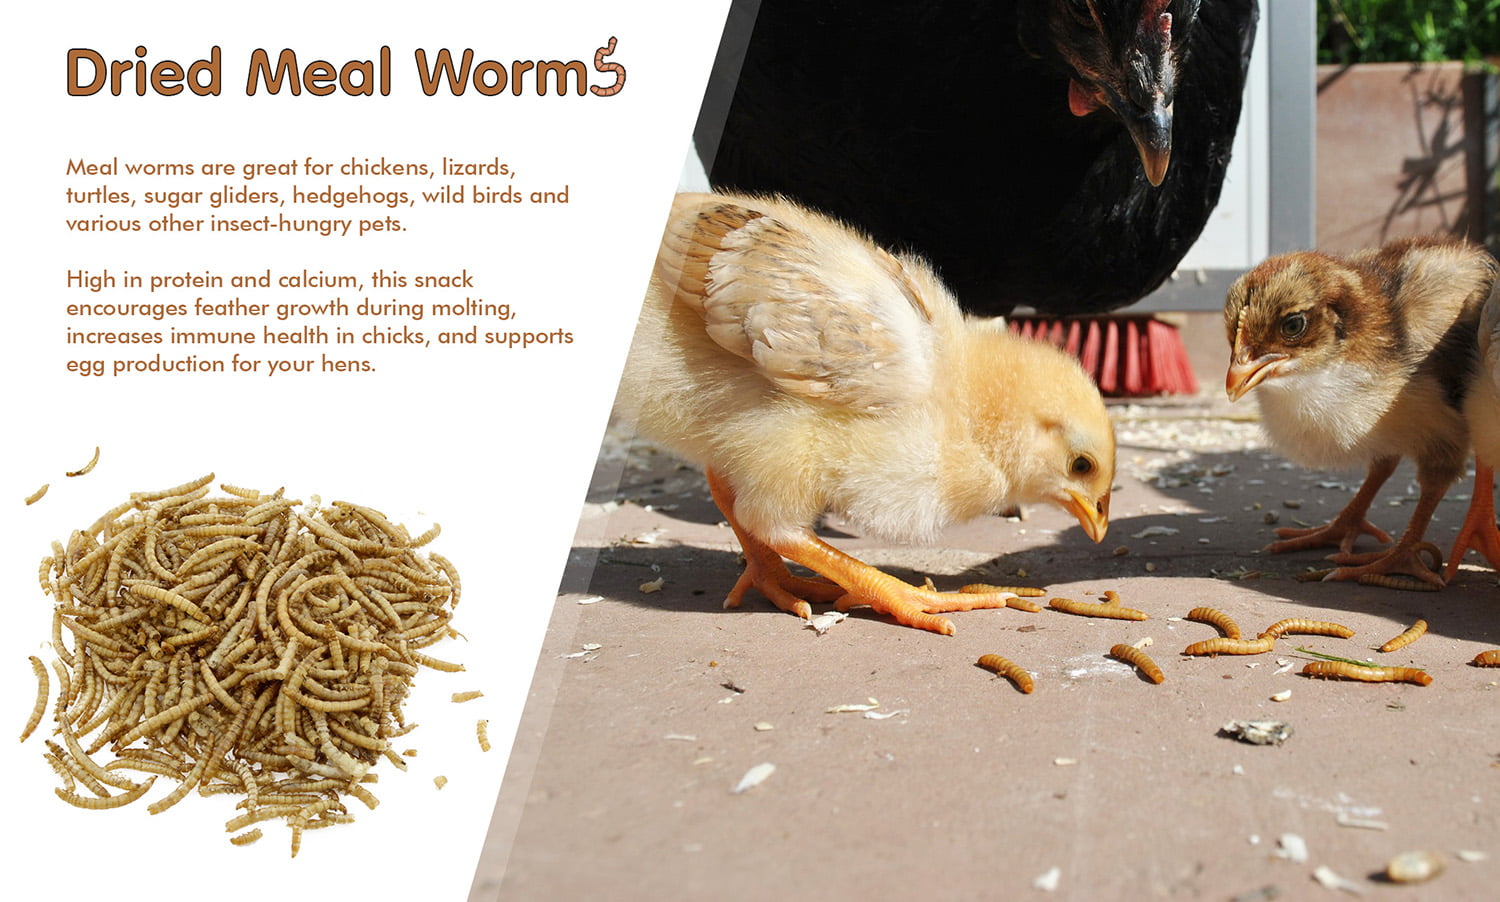 Rural365 Dried Mealworms for Chickens 11 Pounds Protein Filled Chicken Treats